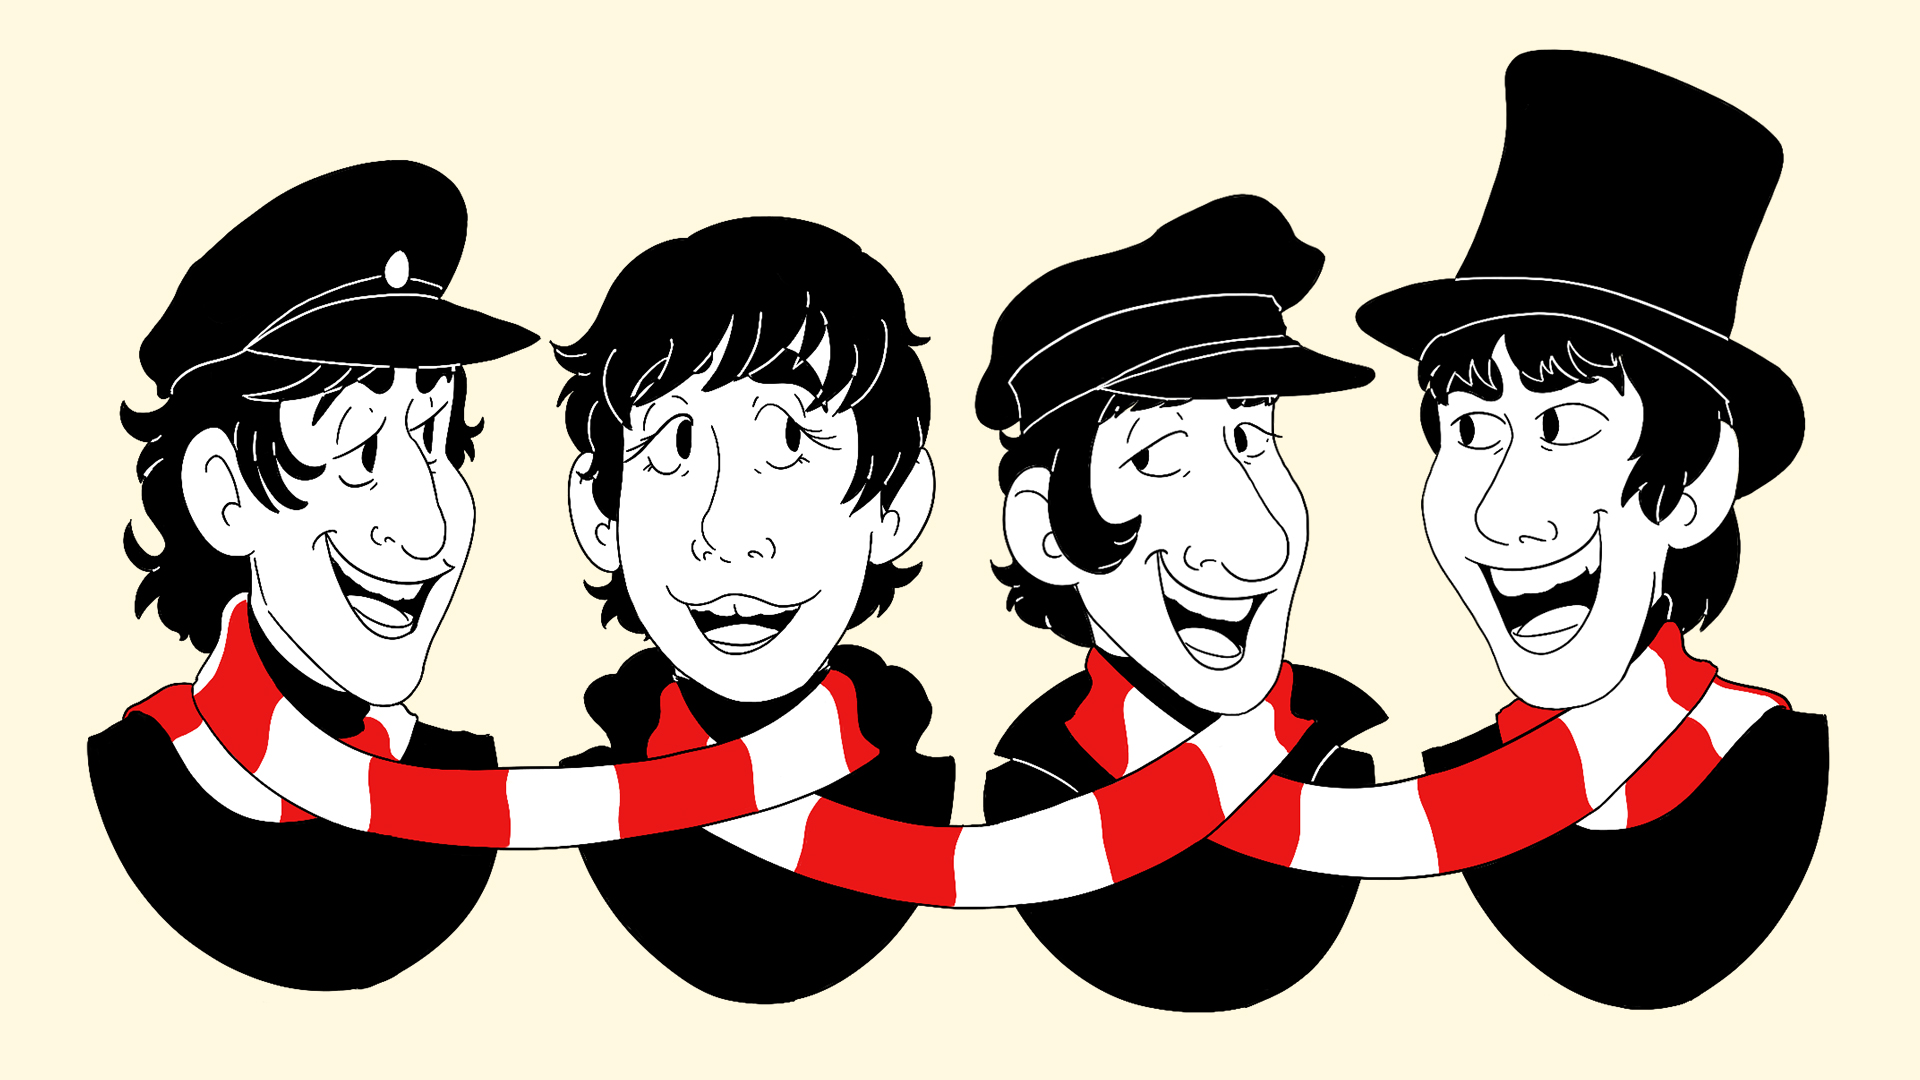 An illustration of busts of the members from the sixties rock band, The Beatles, drawn in black and white. A seamless red and white scarf is looped around their necks, connecting them.